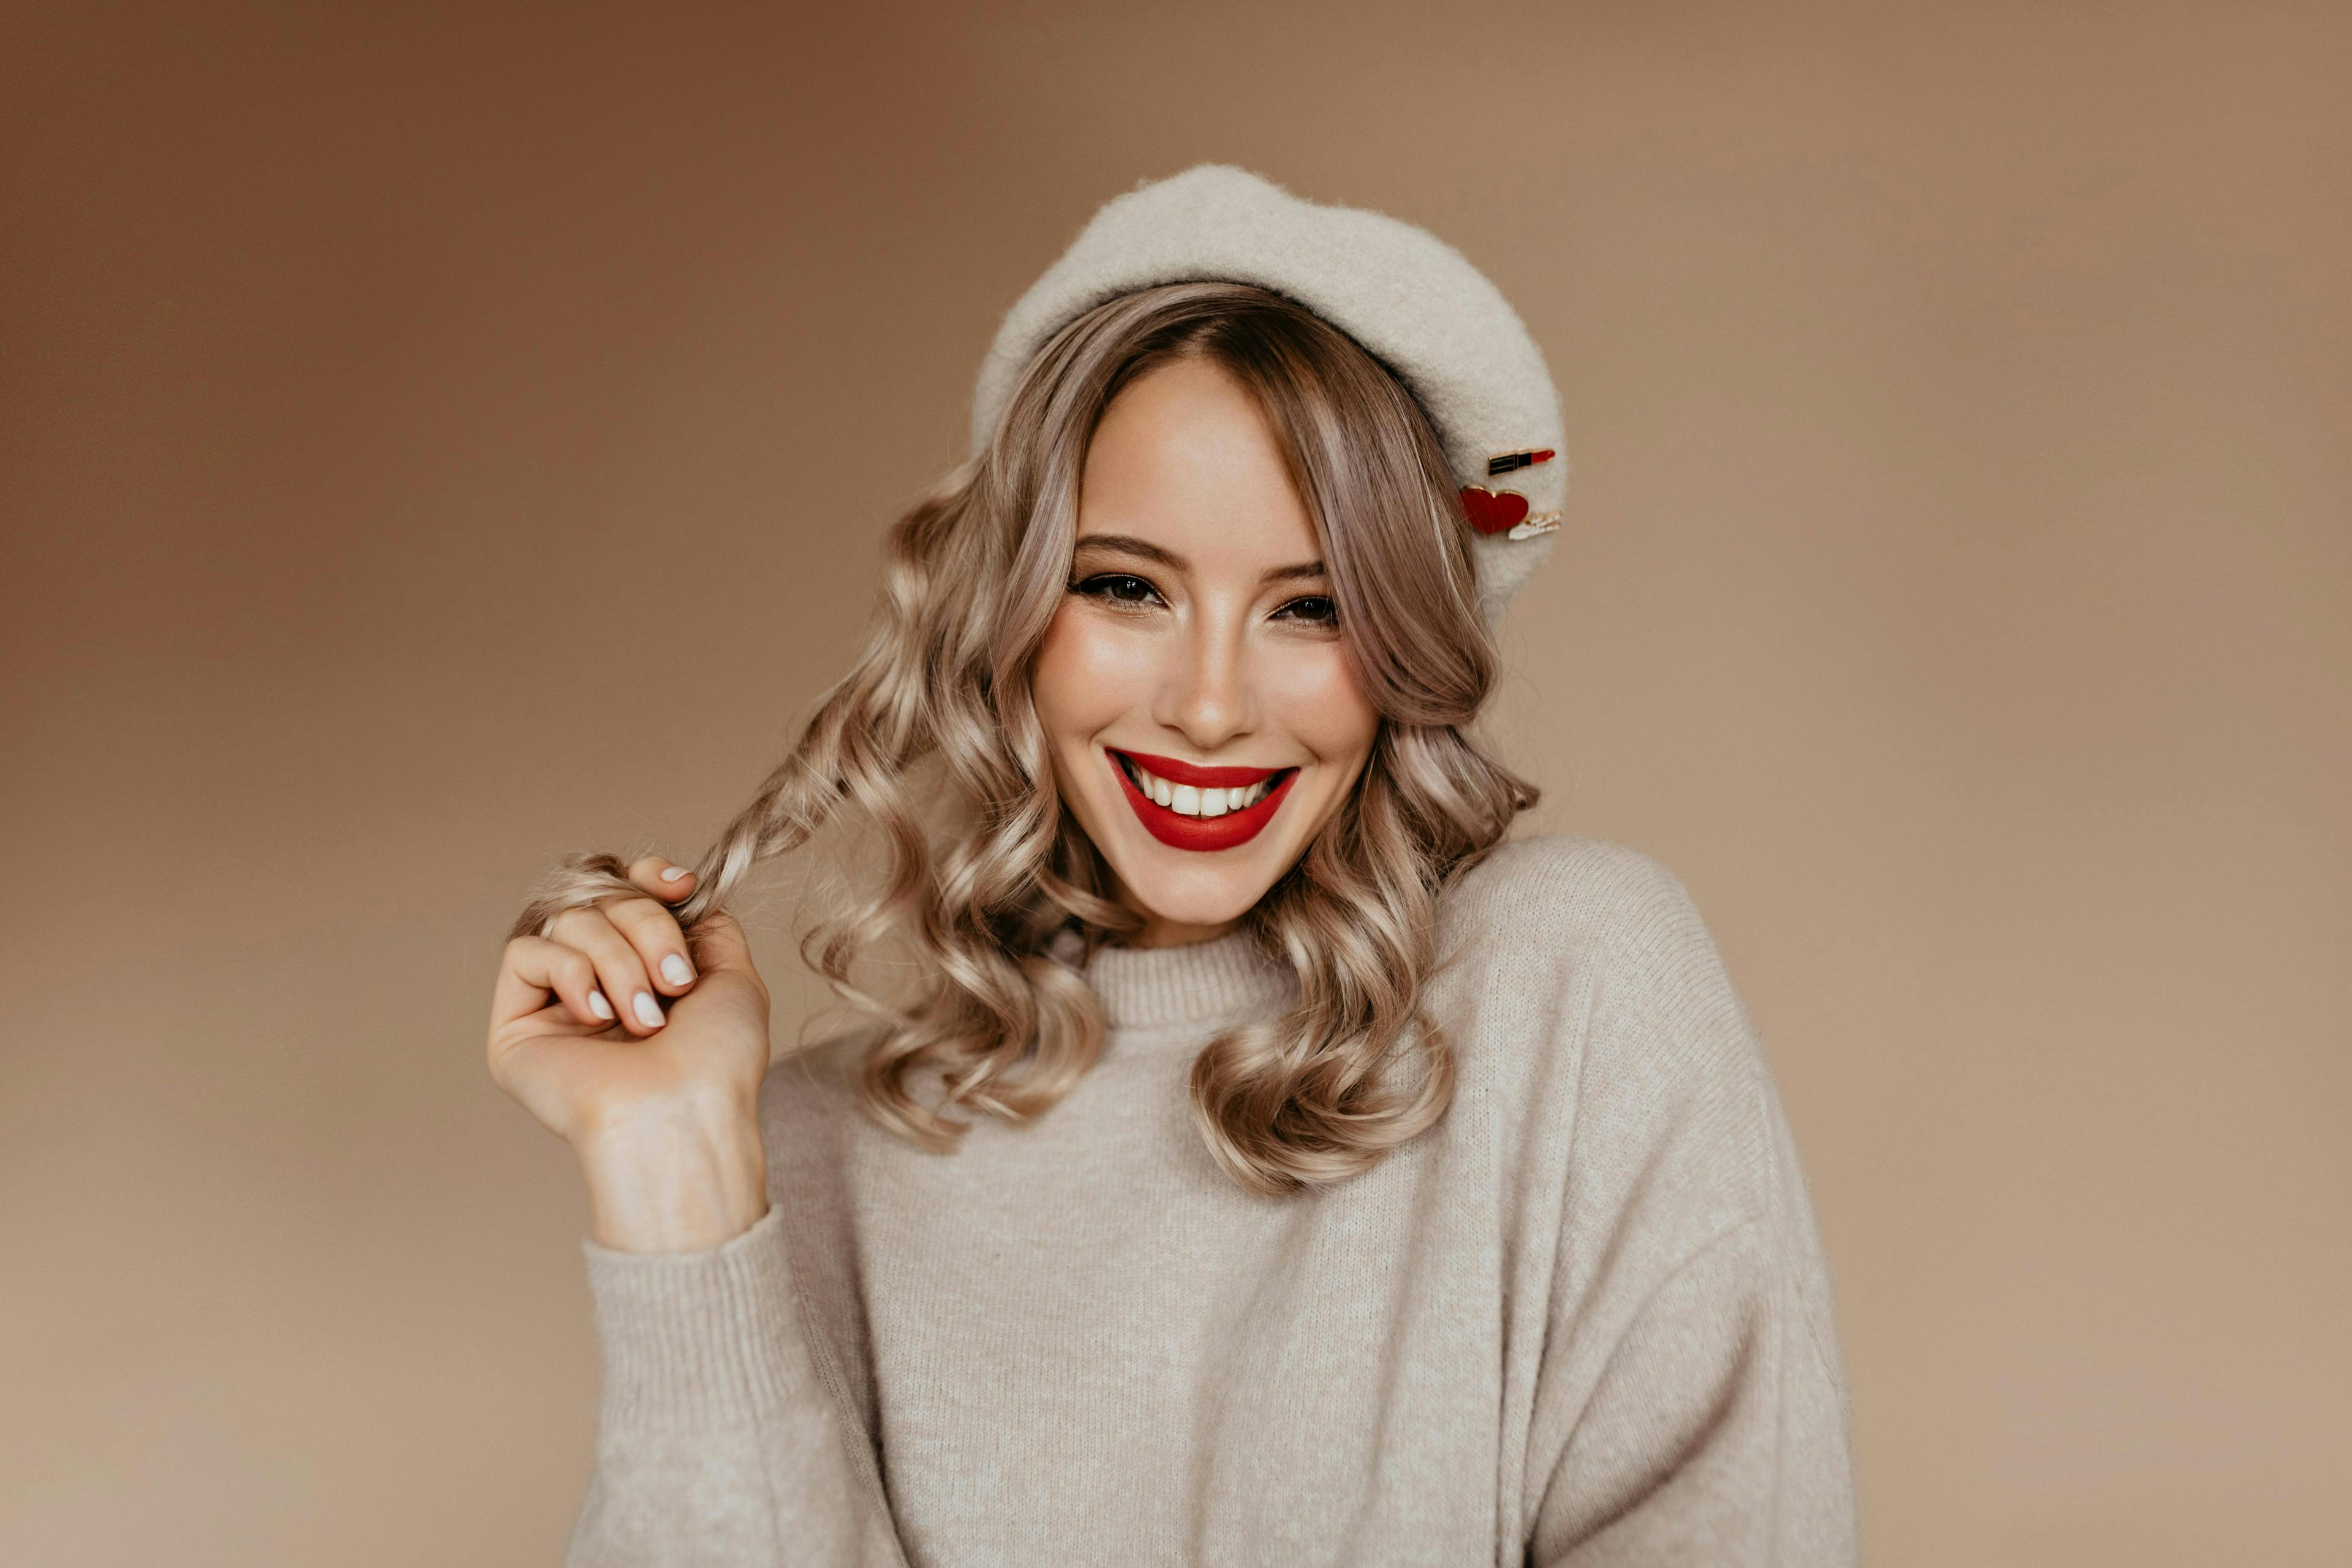 woman sweater smile blonde hat wool fashion girl young winter beautiful style sensual white female pretty portrait happy casual season model adult cute curly vogue people face beauty attractive cheerful glamour cold cap lifestyle stylish studio cashmere wintertime fashionable x-mas autumn enjoy cardigan romantic fair-haired indoor positive laugh beige beret clothing apparel person human sleeve